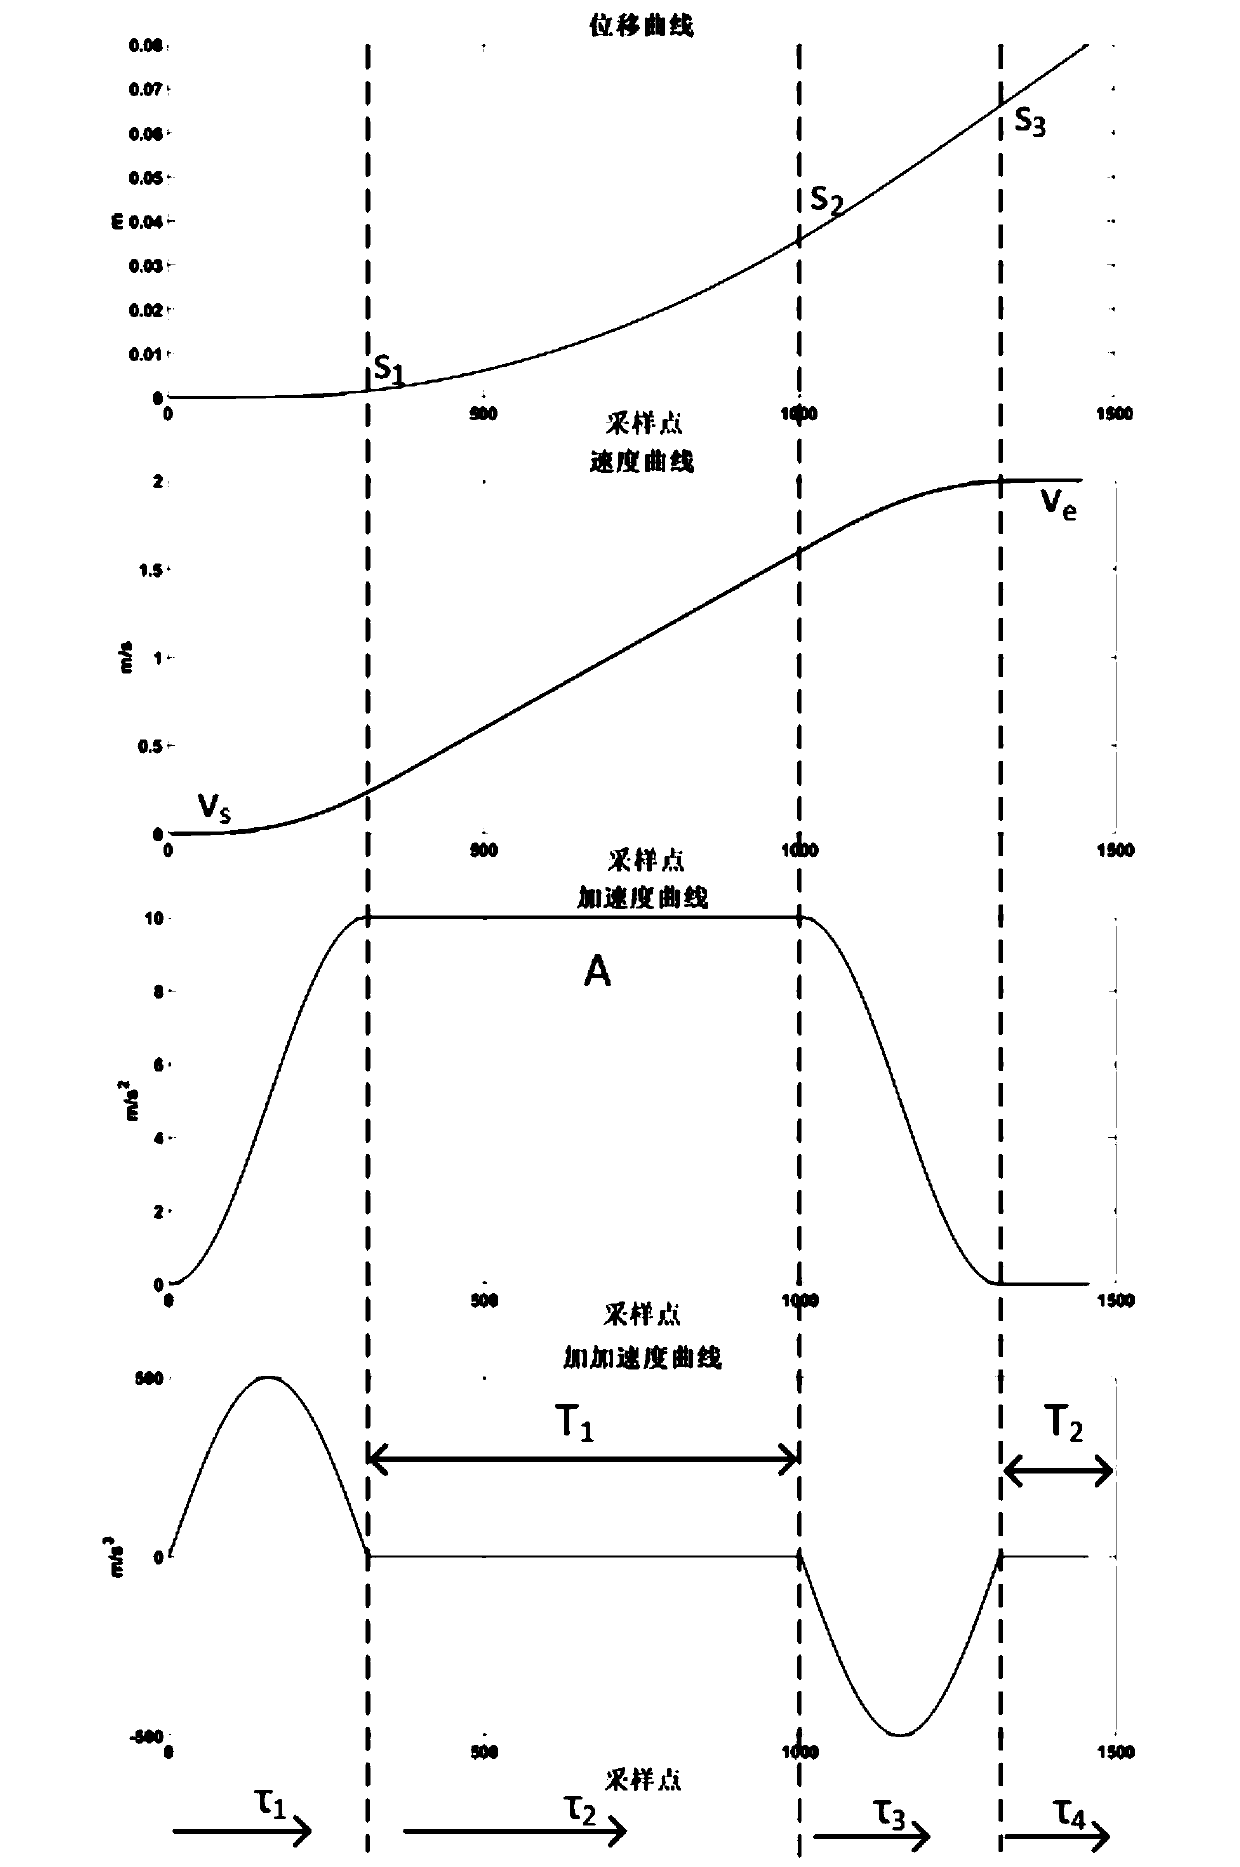 A motion planning method for machine tool machining trajectory based on sinusoidal square acceleration look-ahead